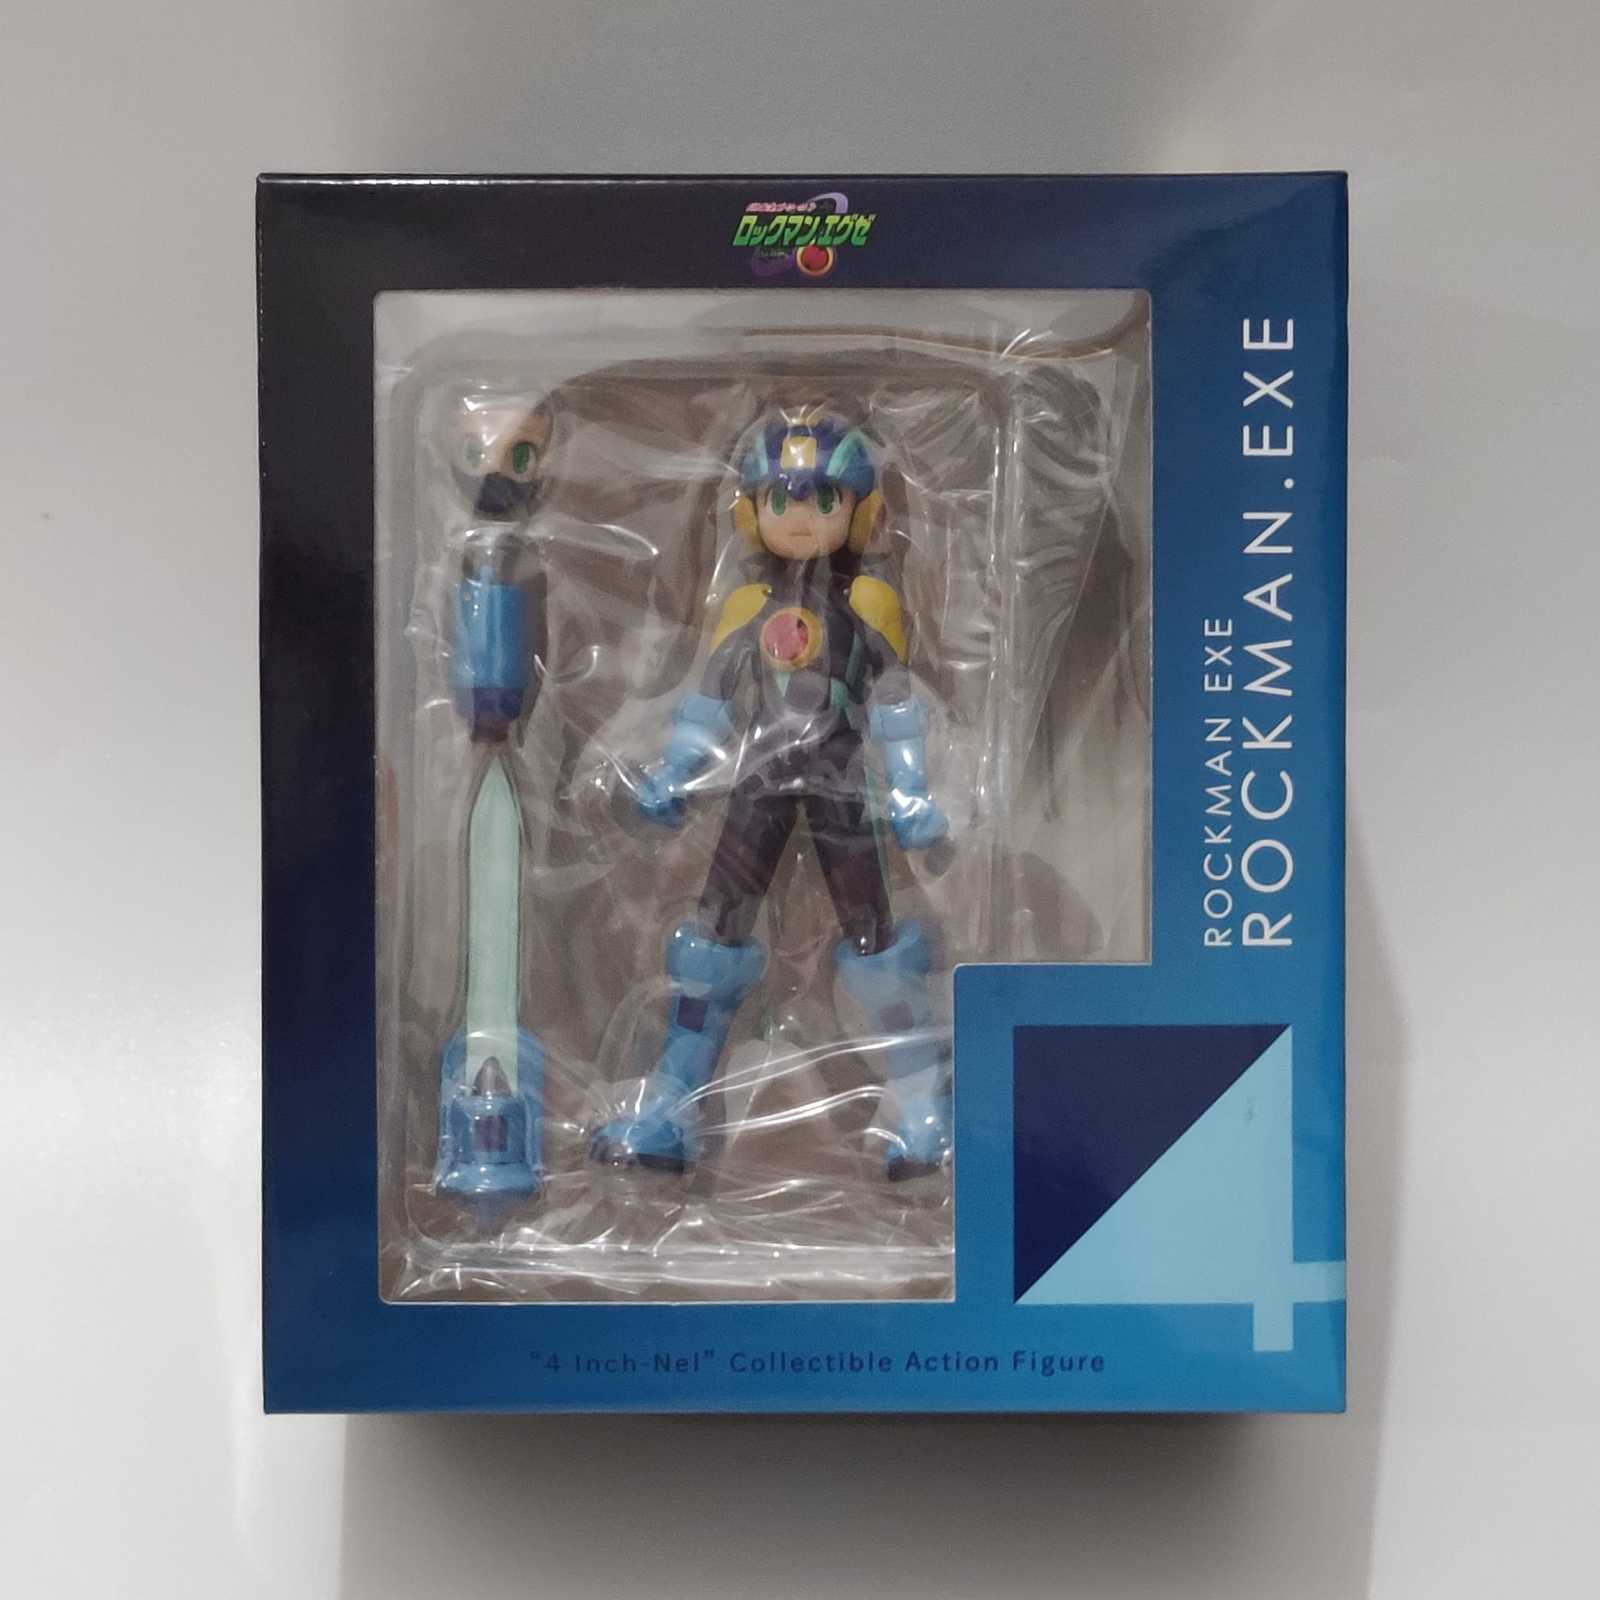 Primary image for Sentinel Megaman Battle Rockman EXE 4 Inch Nel Action Figure Mega Man Exe New